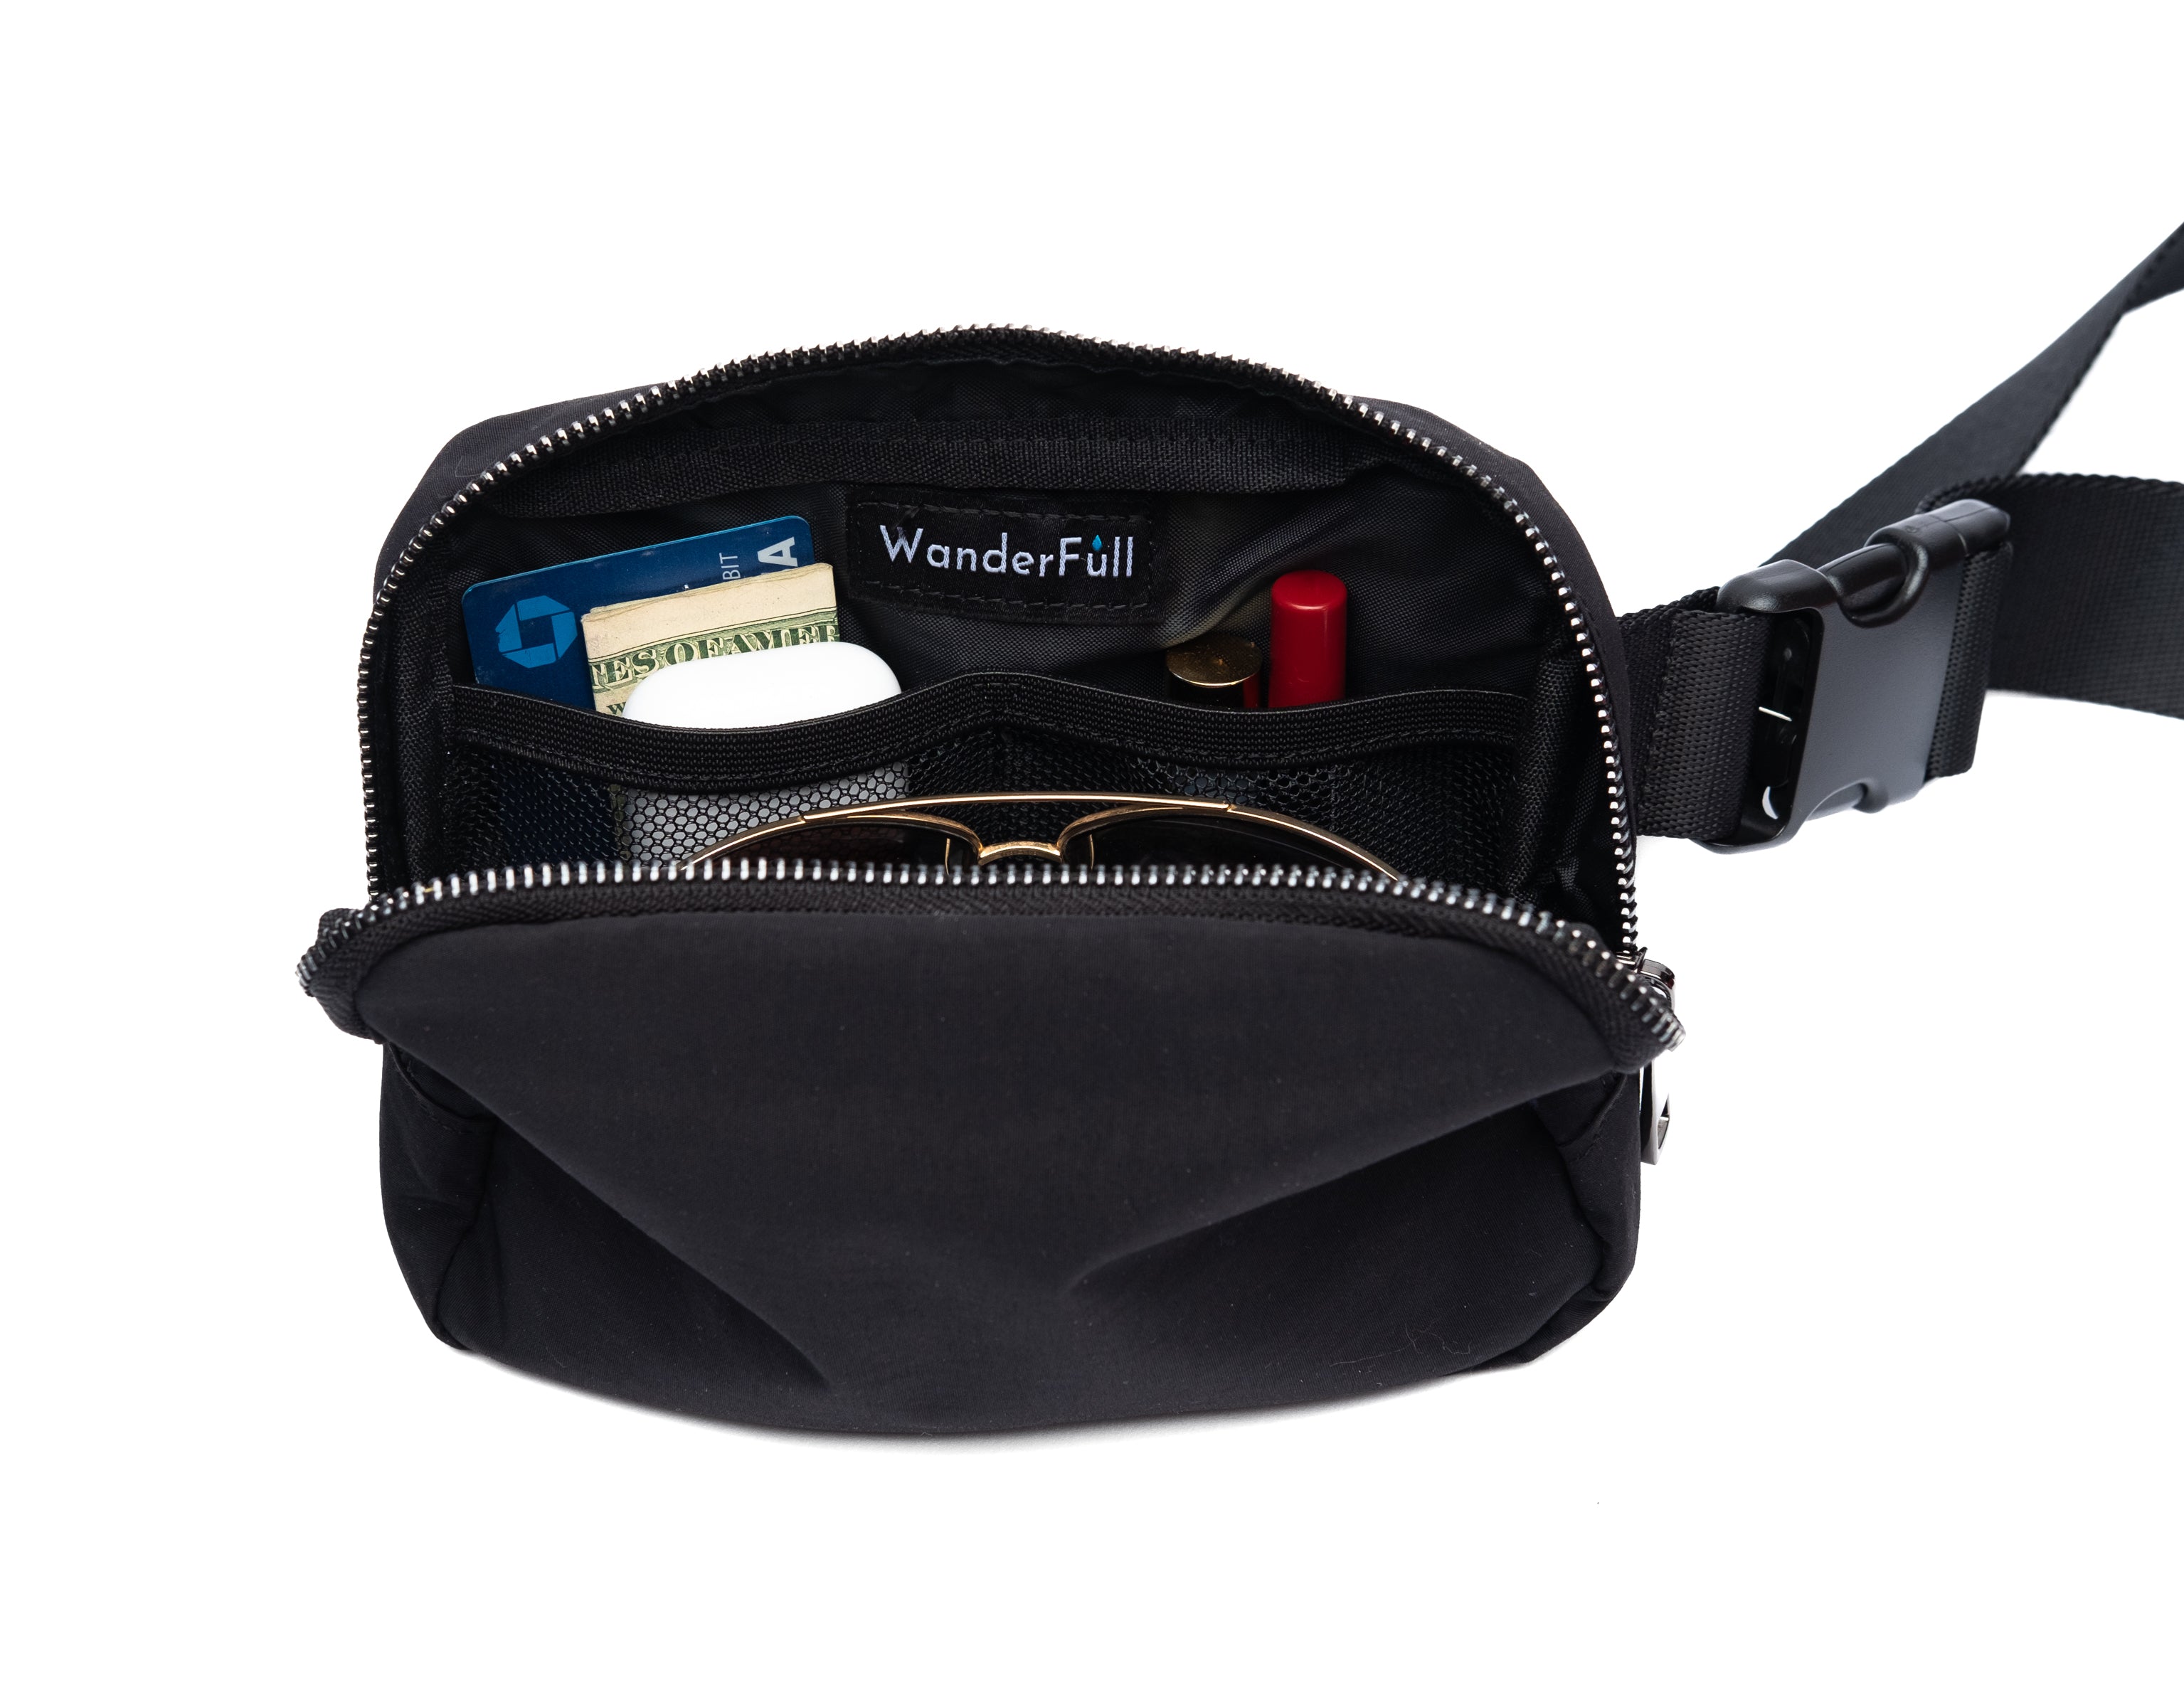 Black HydroBeltbag with Removable HydroHolster